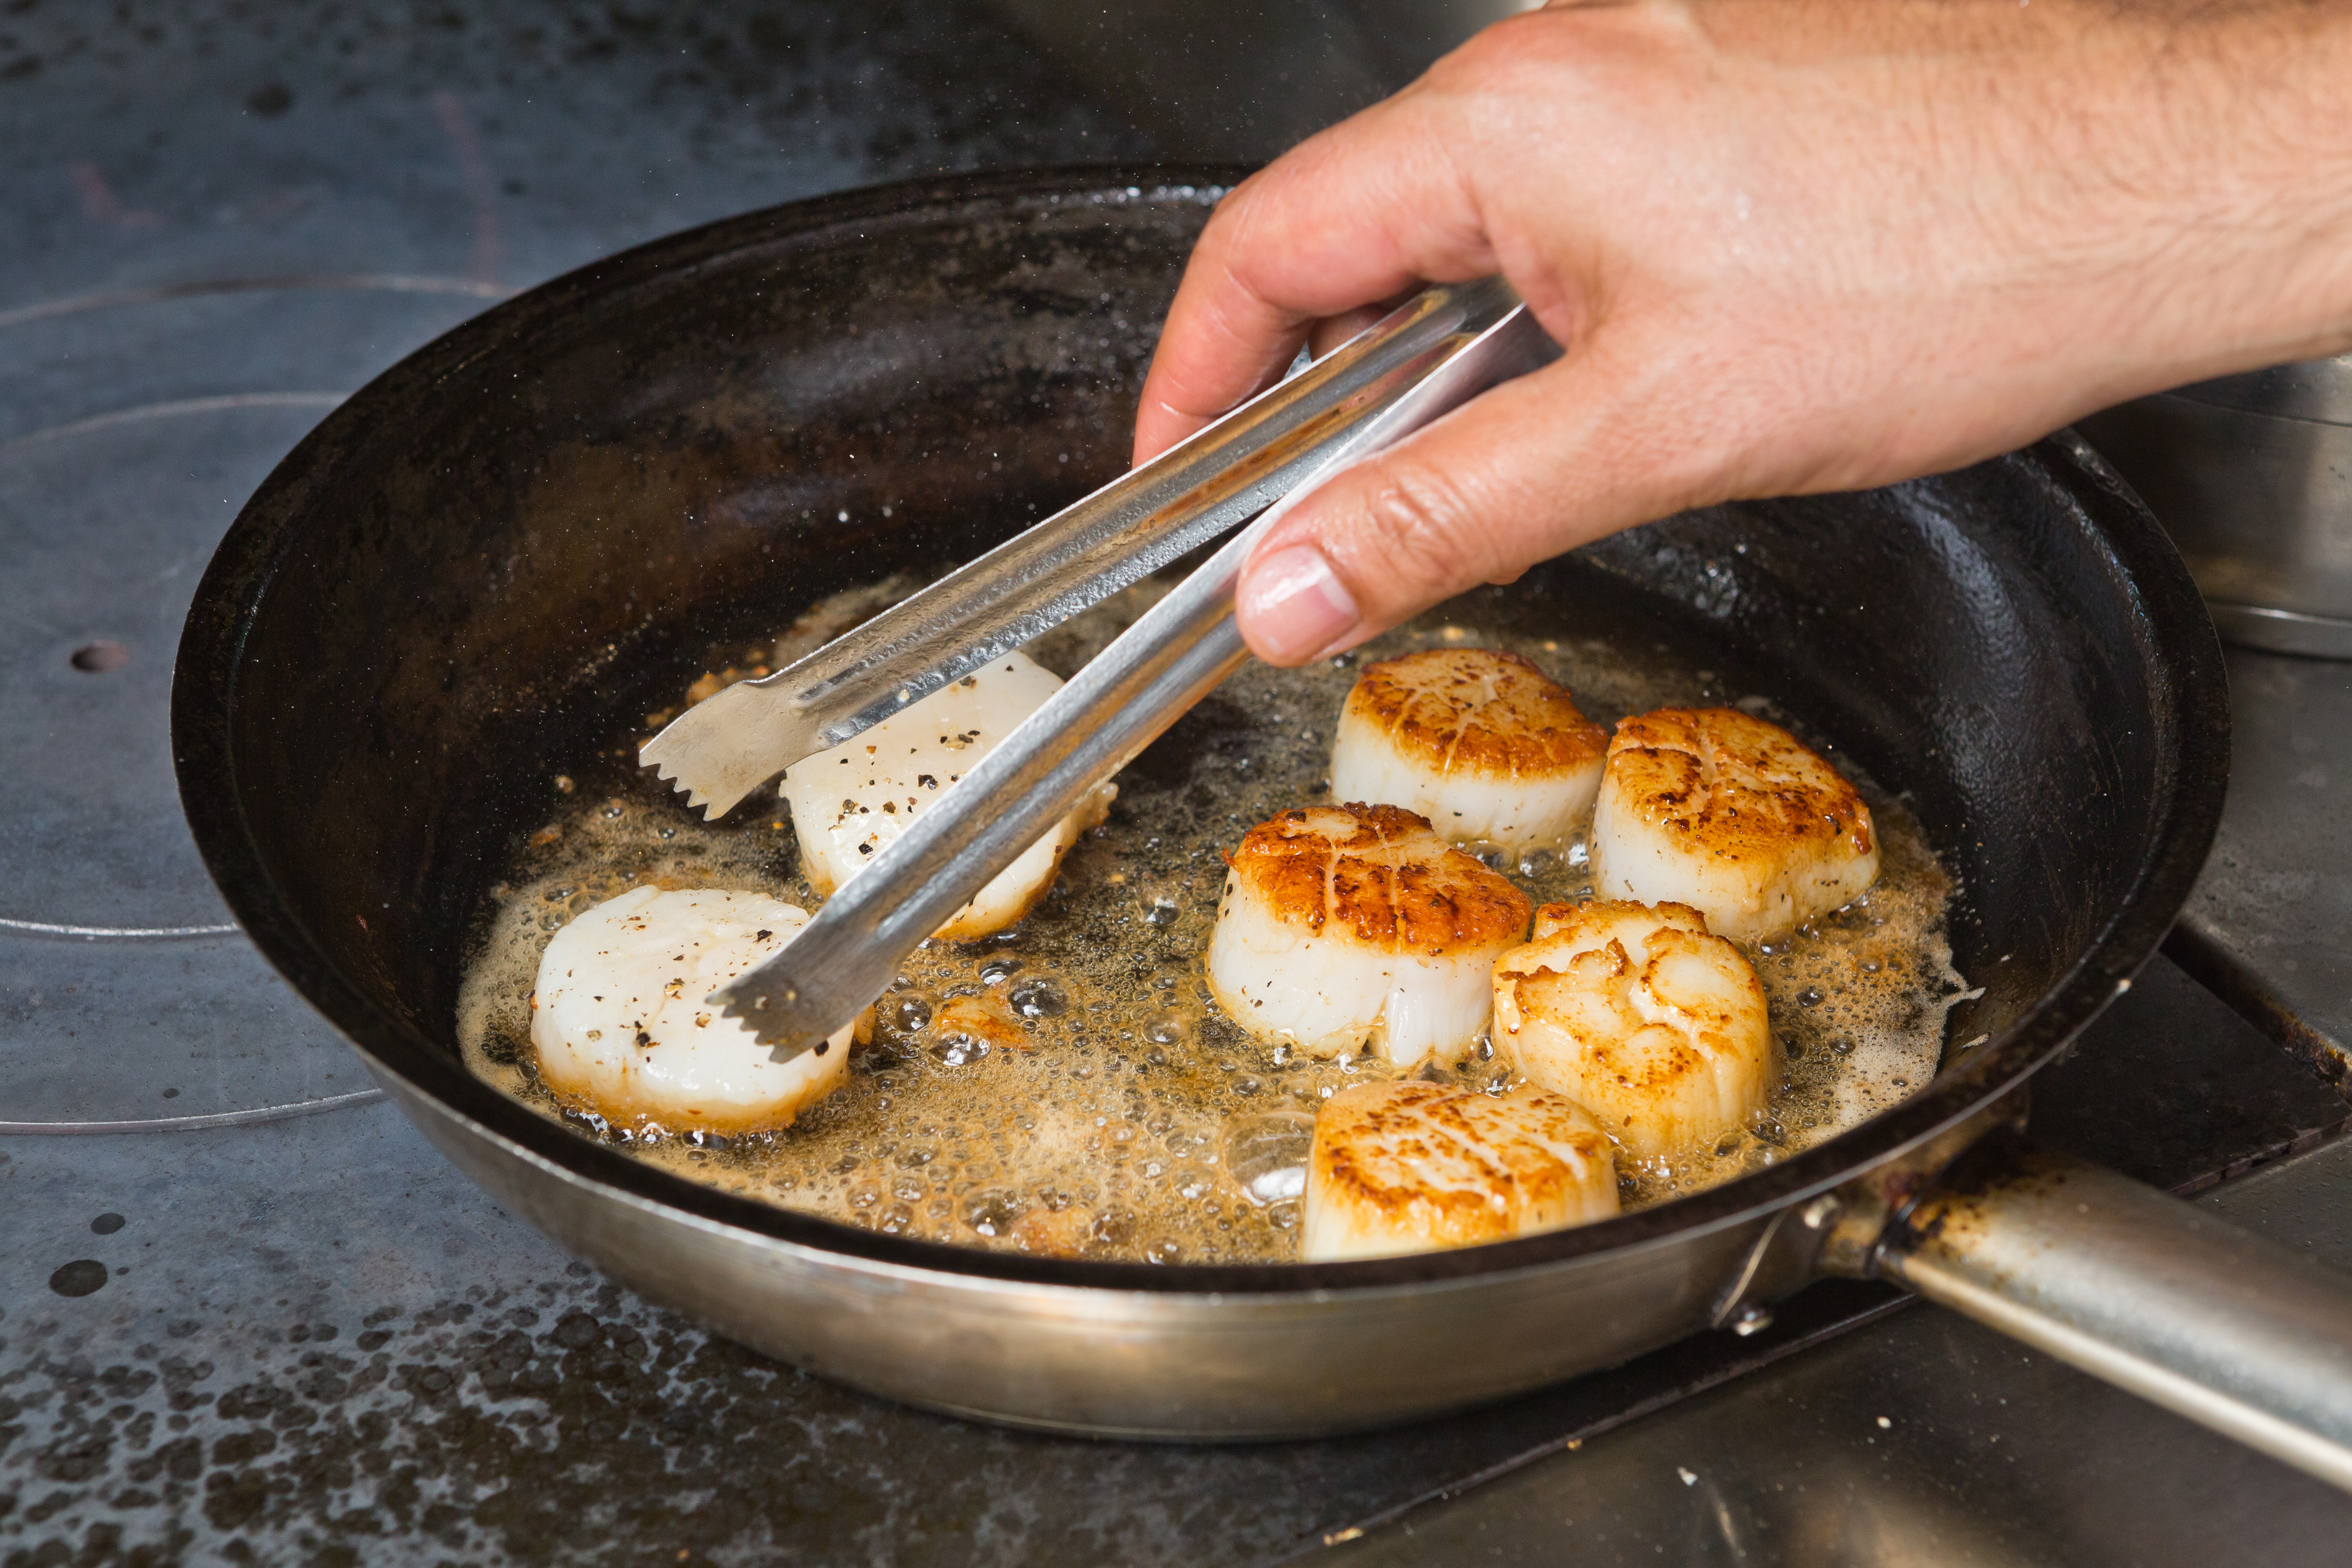 Scallops searing in a pan are flipped over by a person holding a pair of tongs.